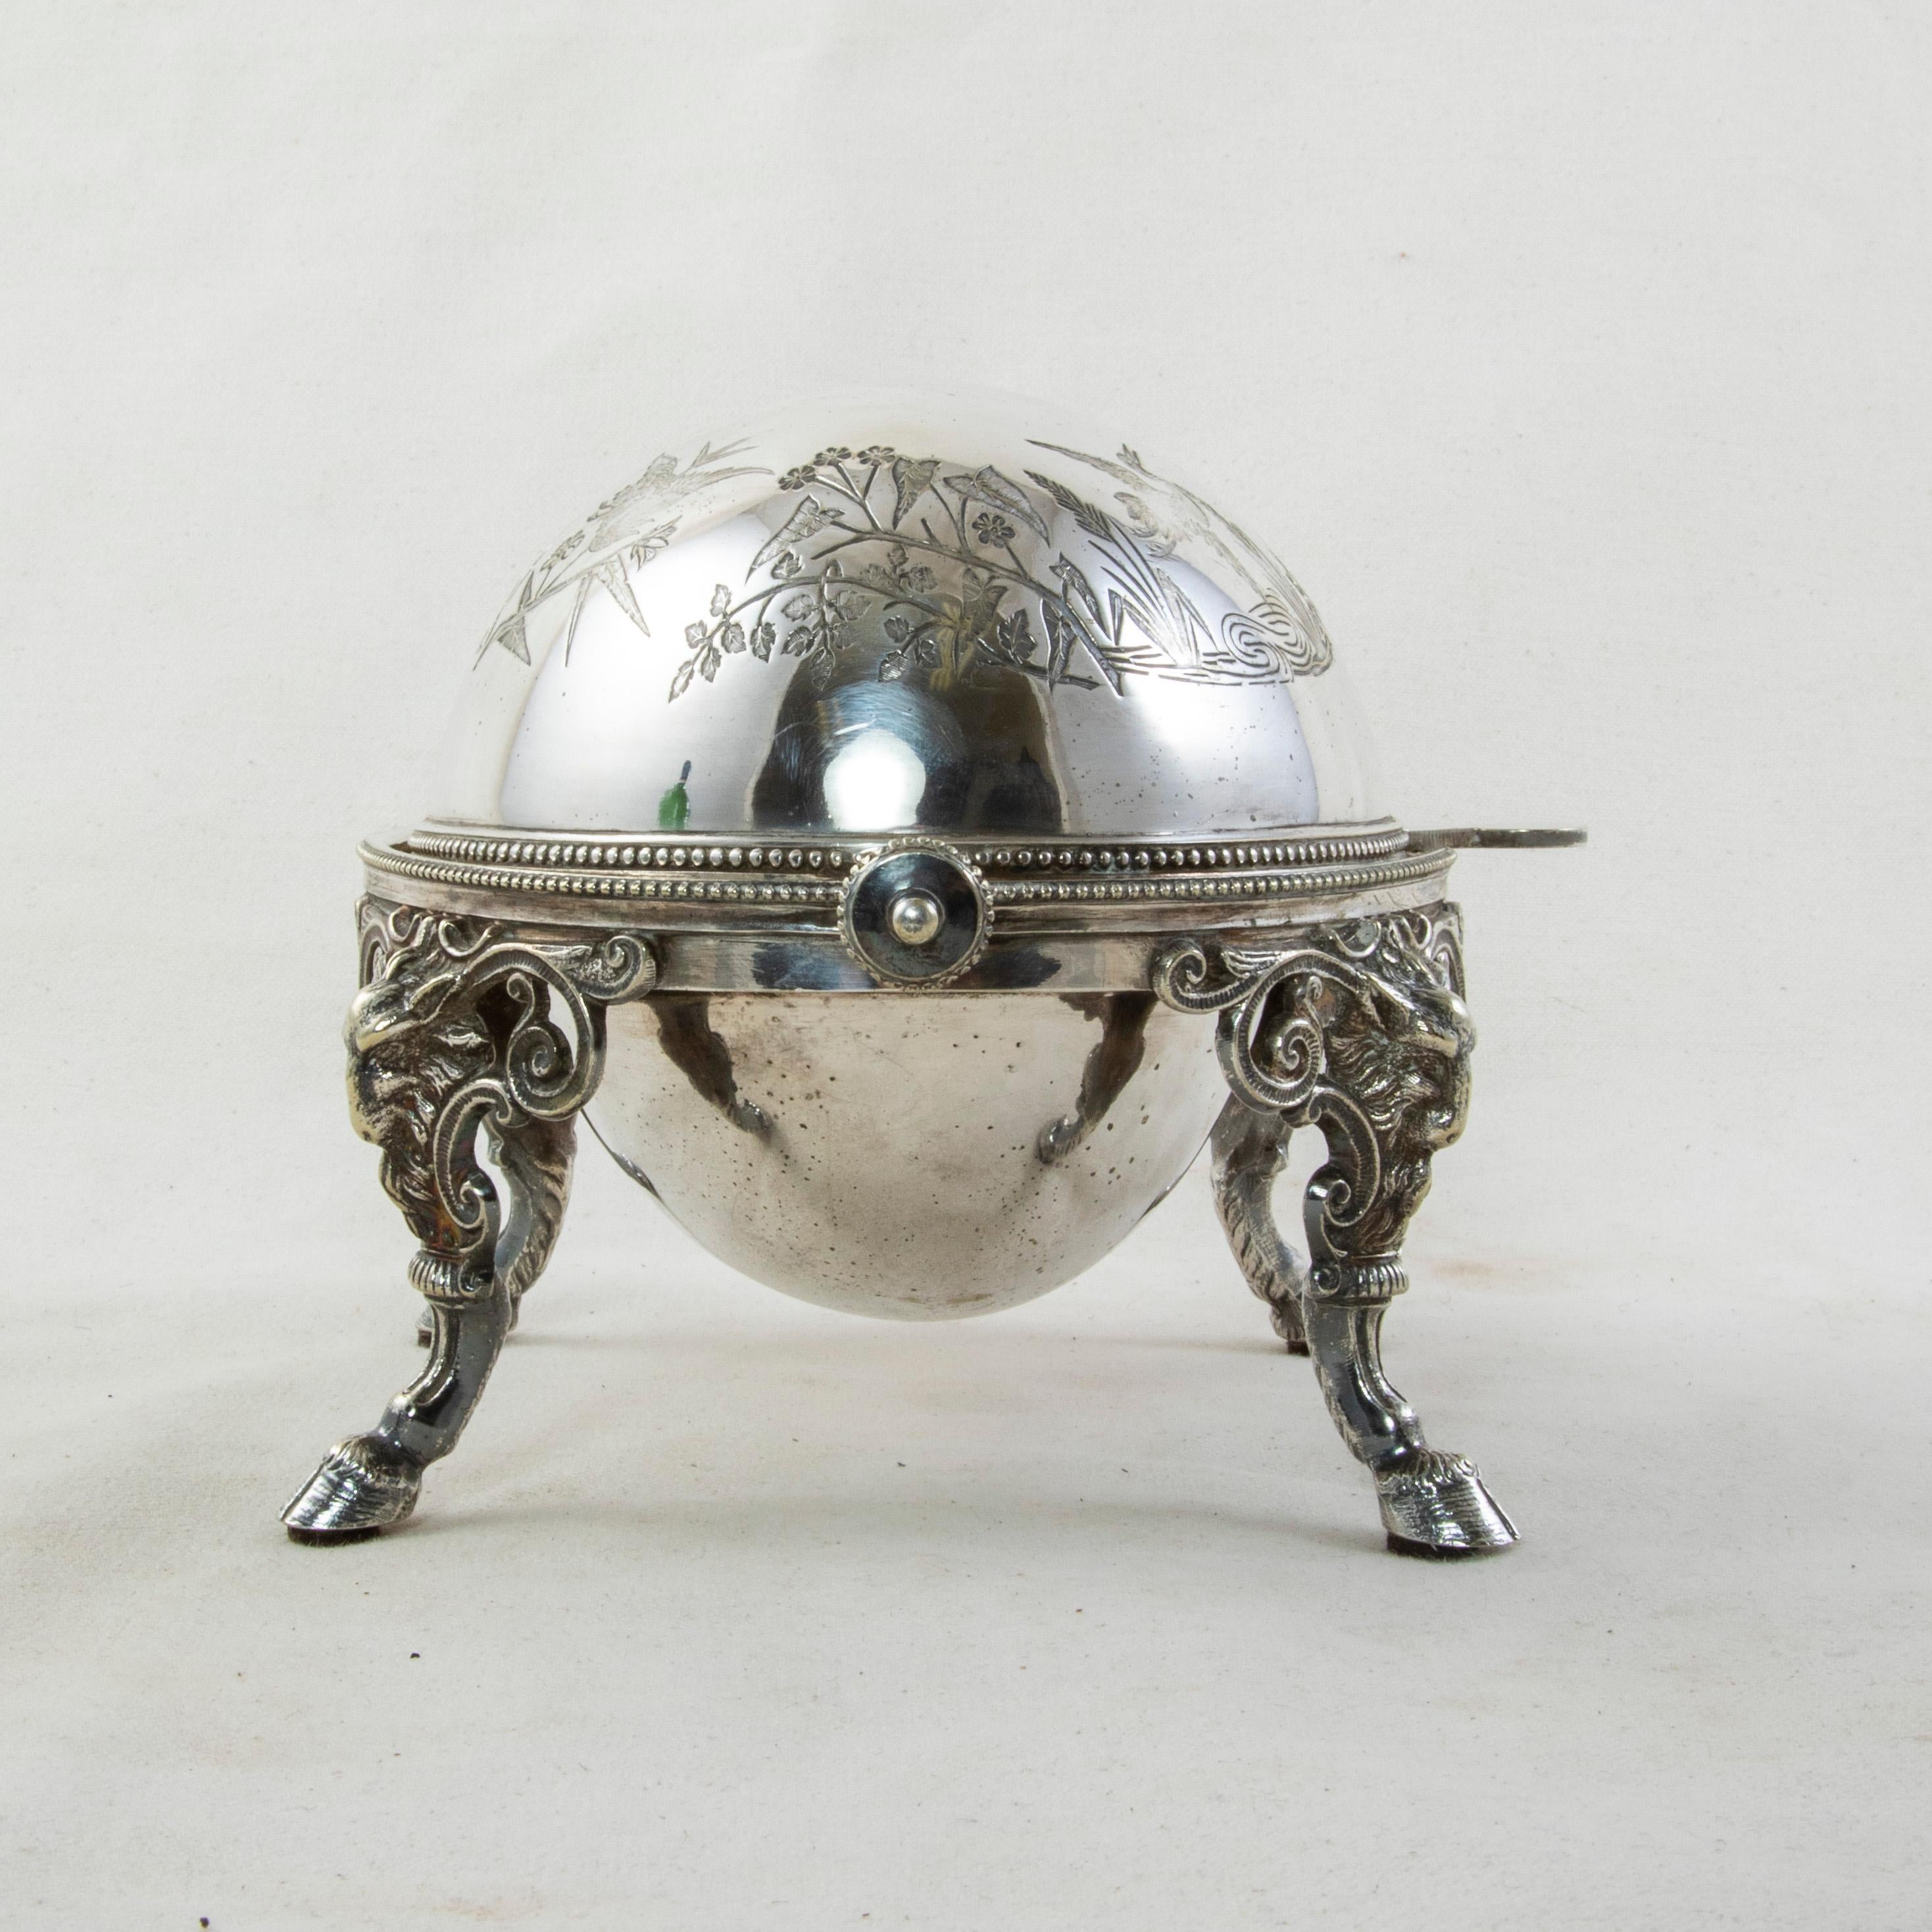 20th Century French Silver Plate Domed Serving Piece with Swivel Lid c. 1900